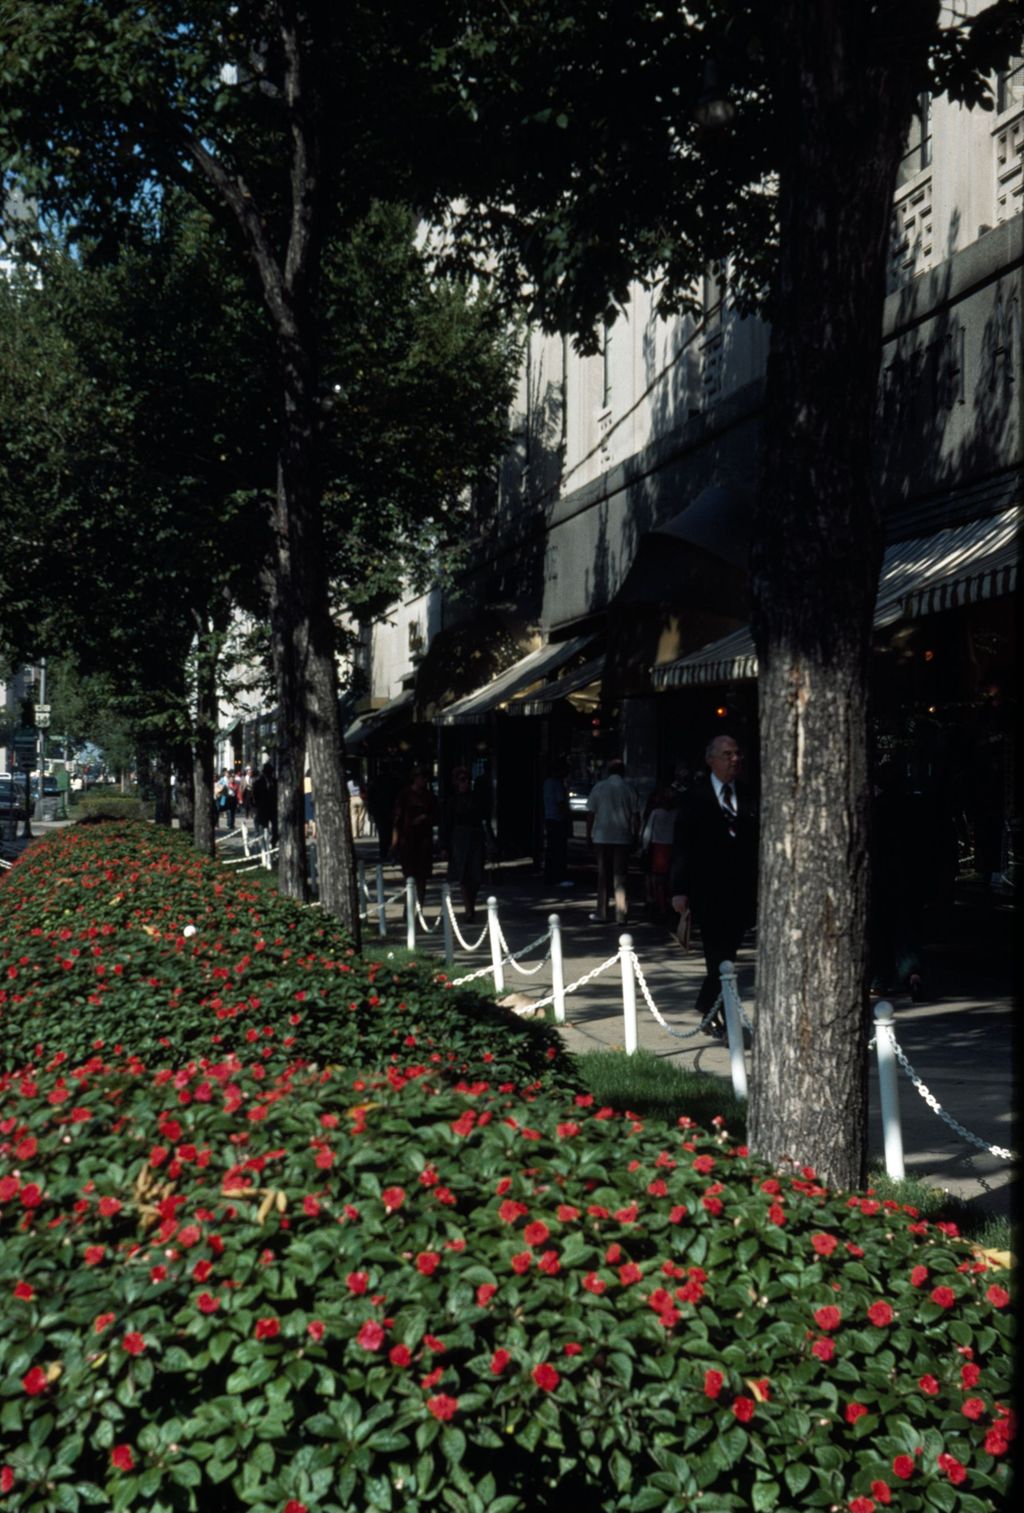 Miniature of Flower beds in front of Saks Fifth Avenue